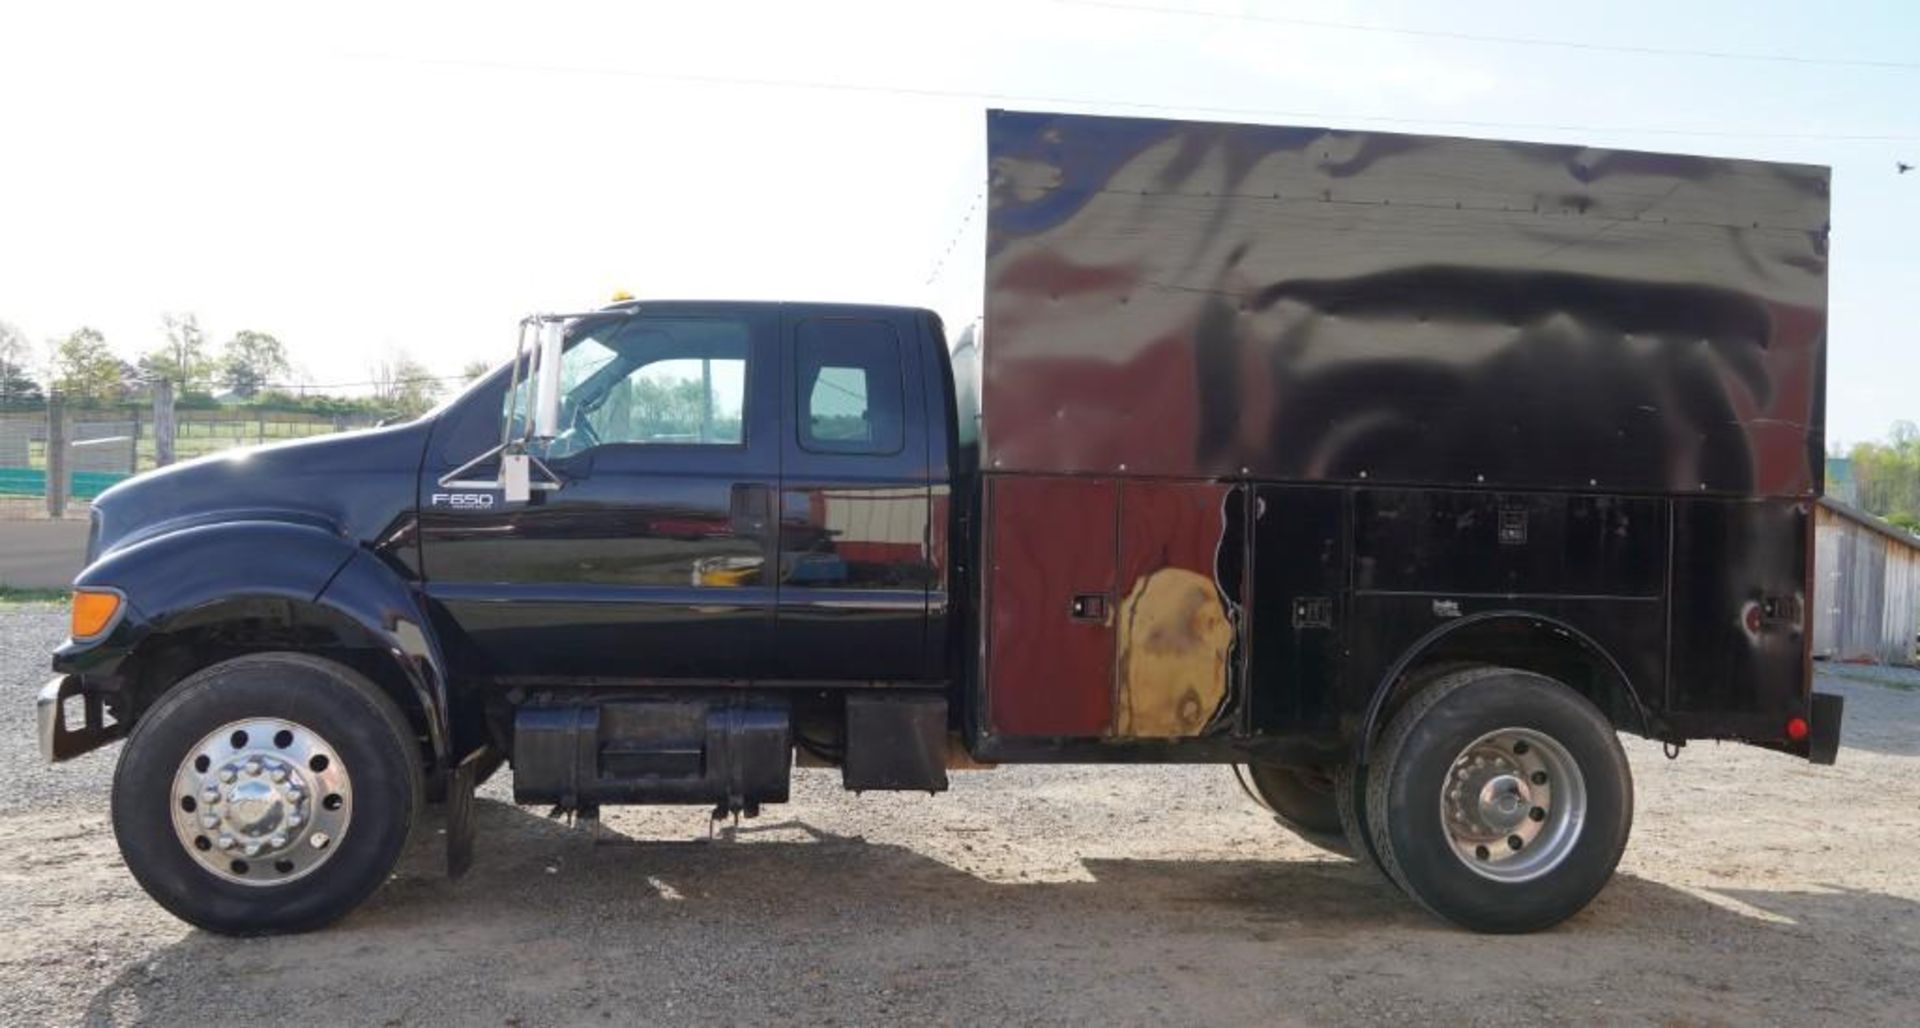 2000 Ford F-650 Super Duty XLT Service Truck - Image 2 of 67